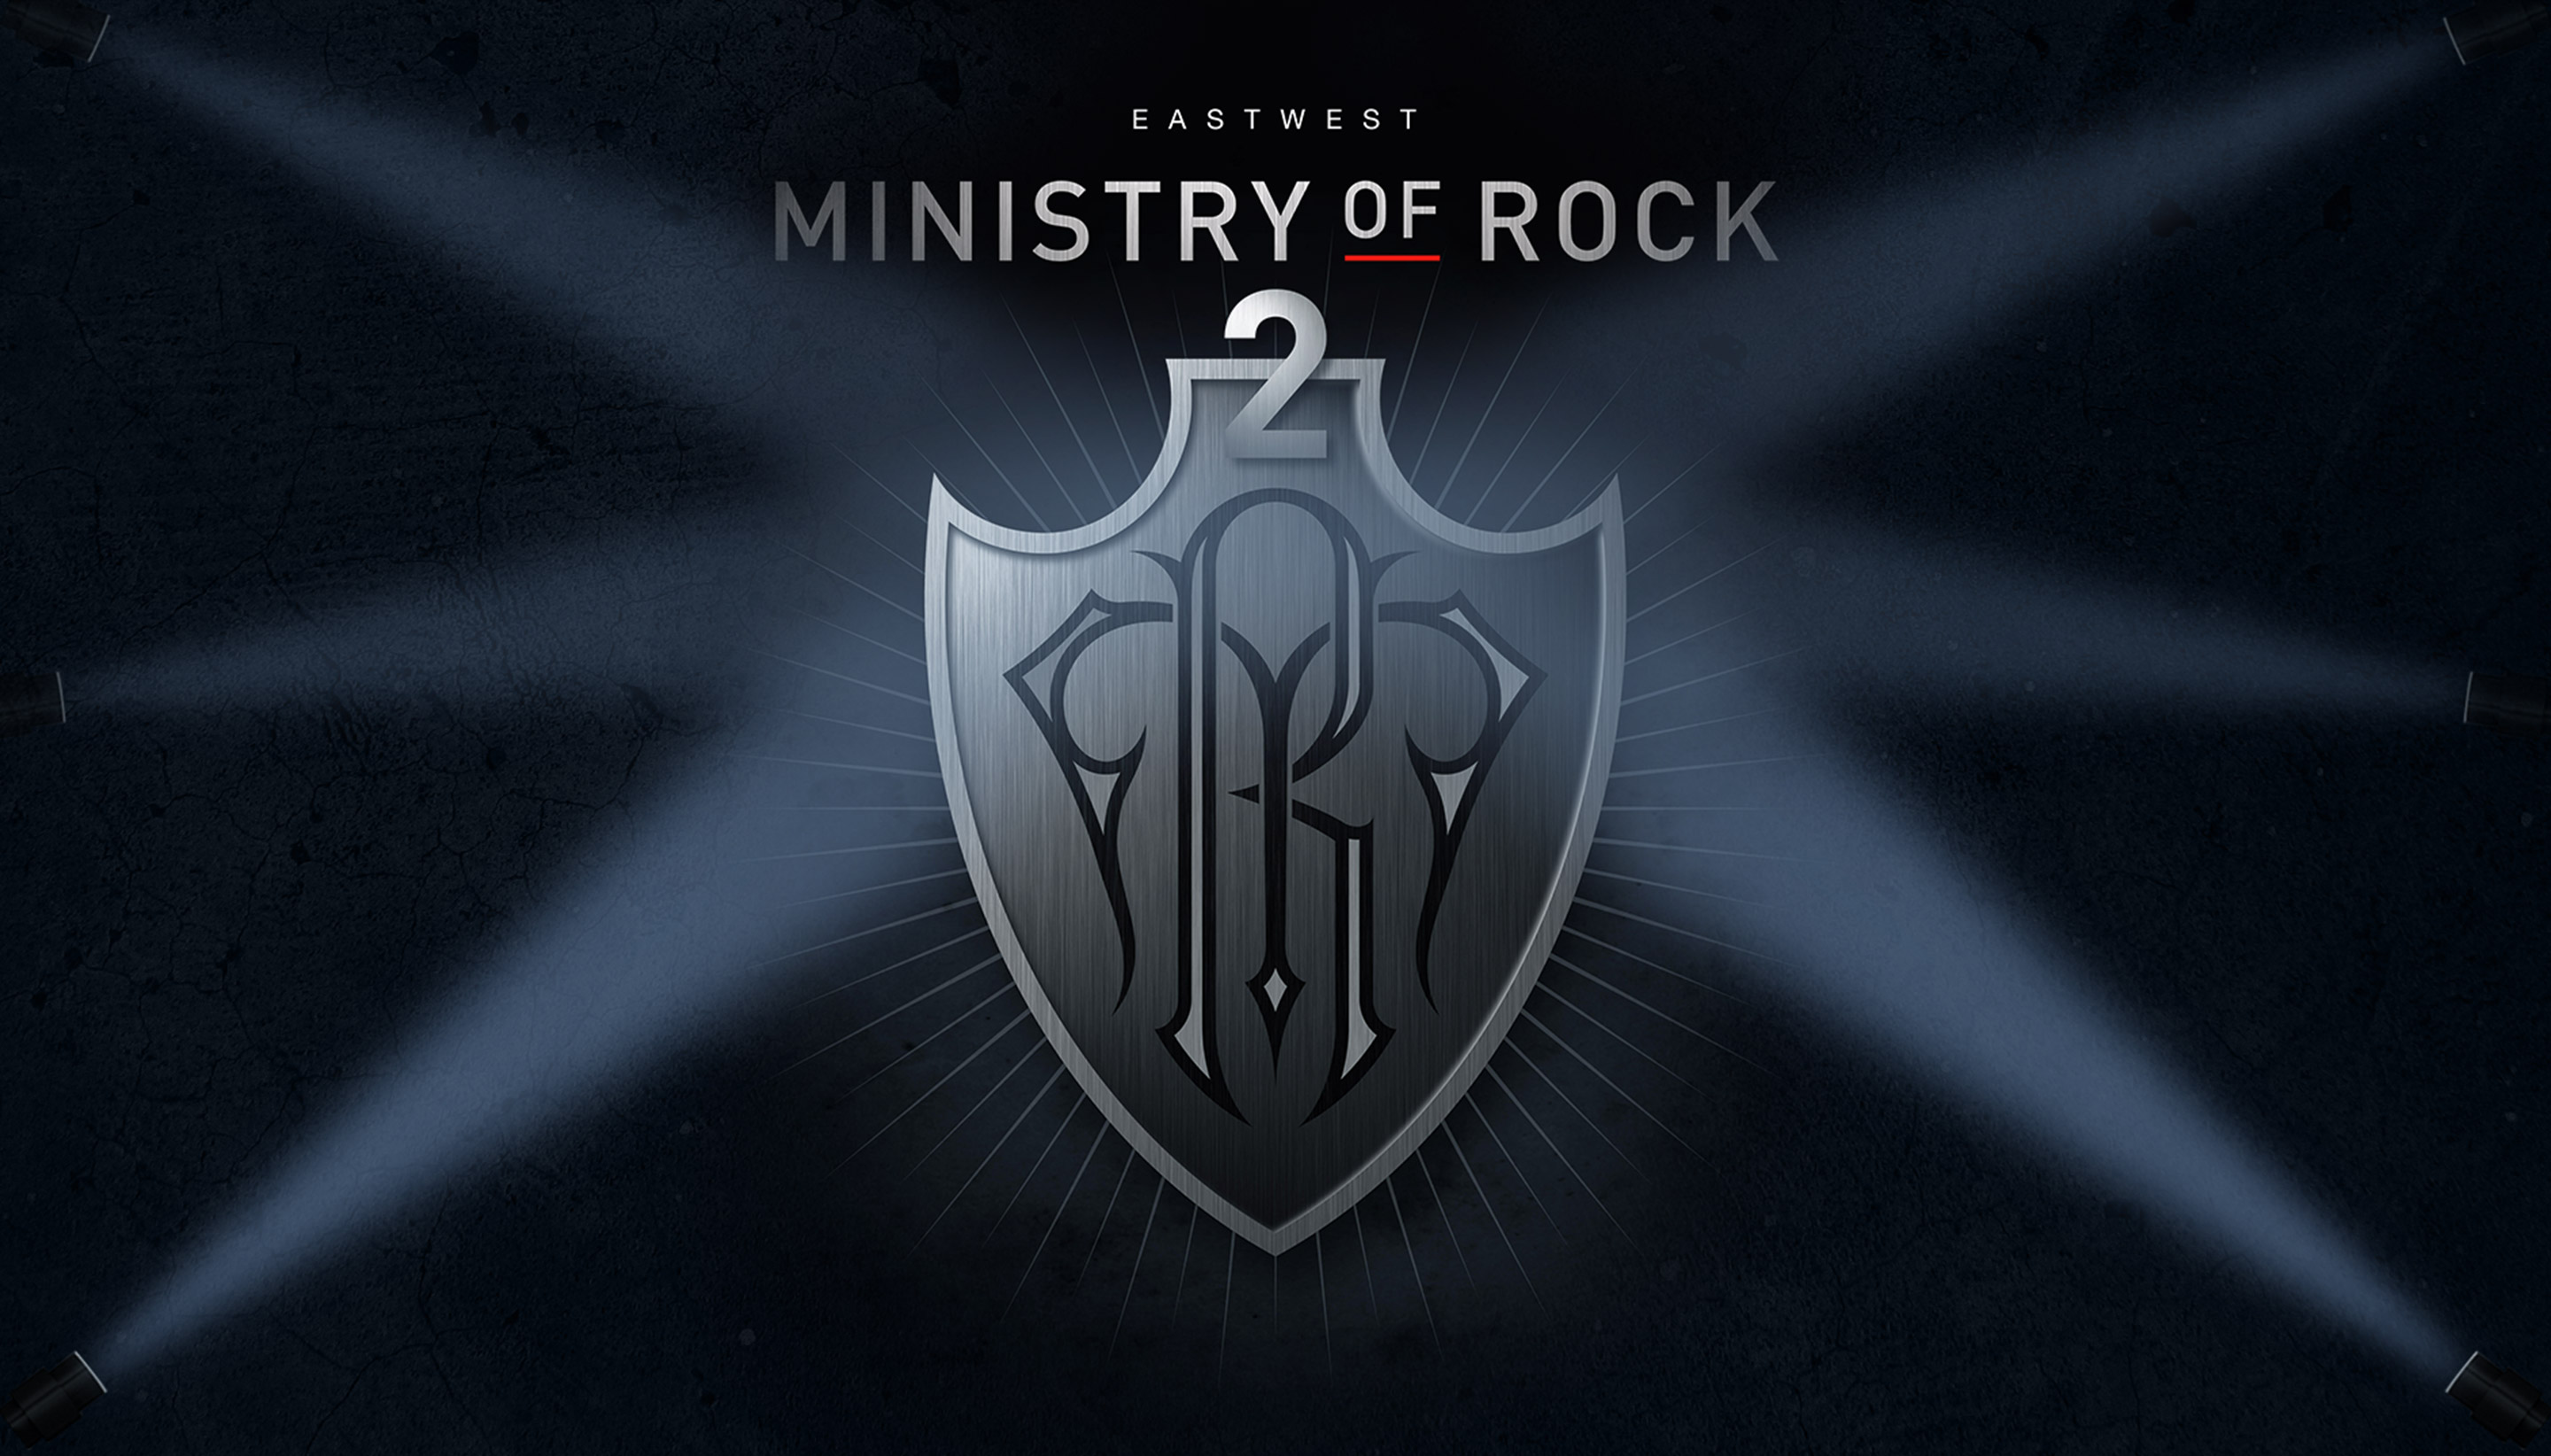 EastWest Ministry of Rock 2